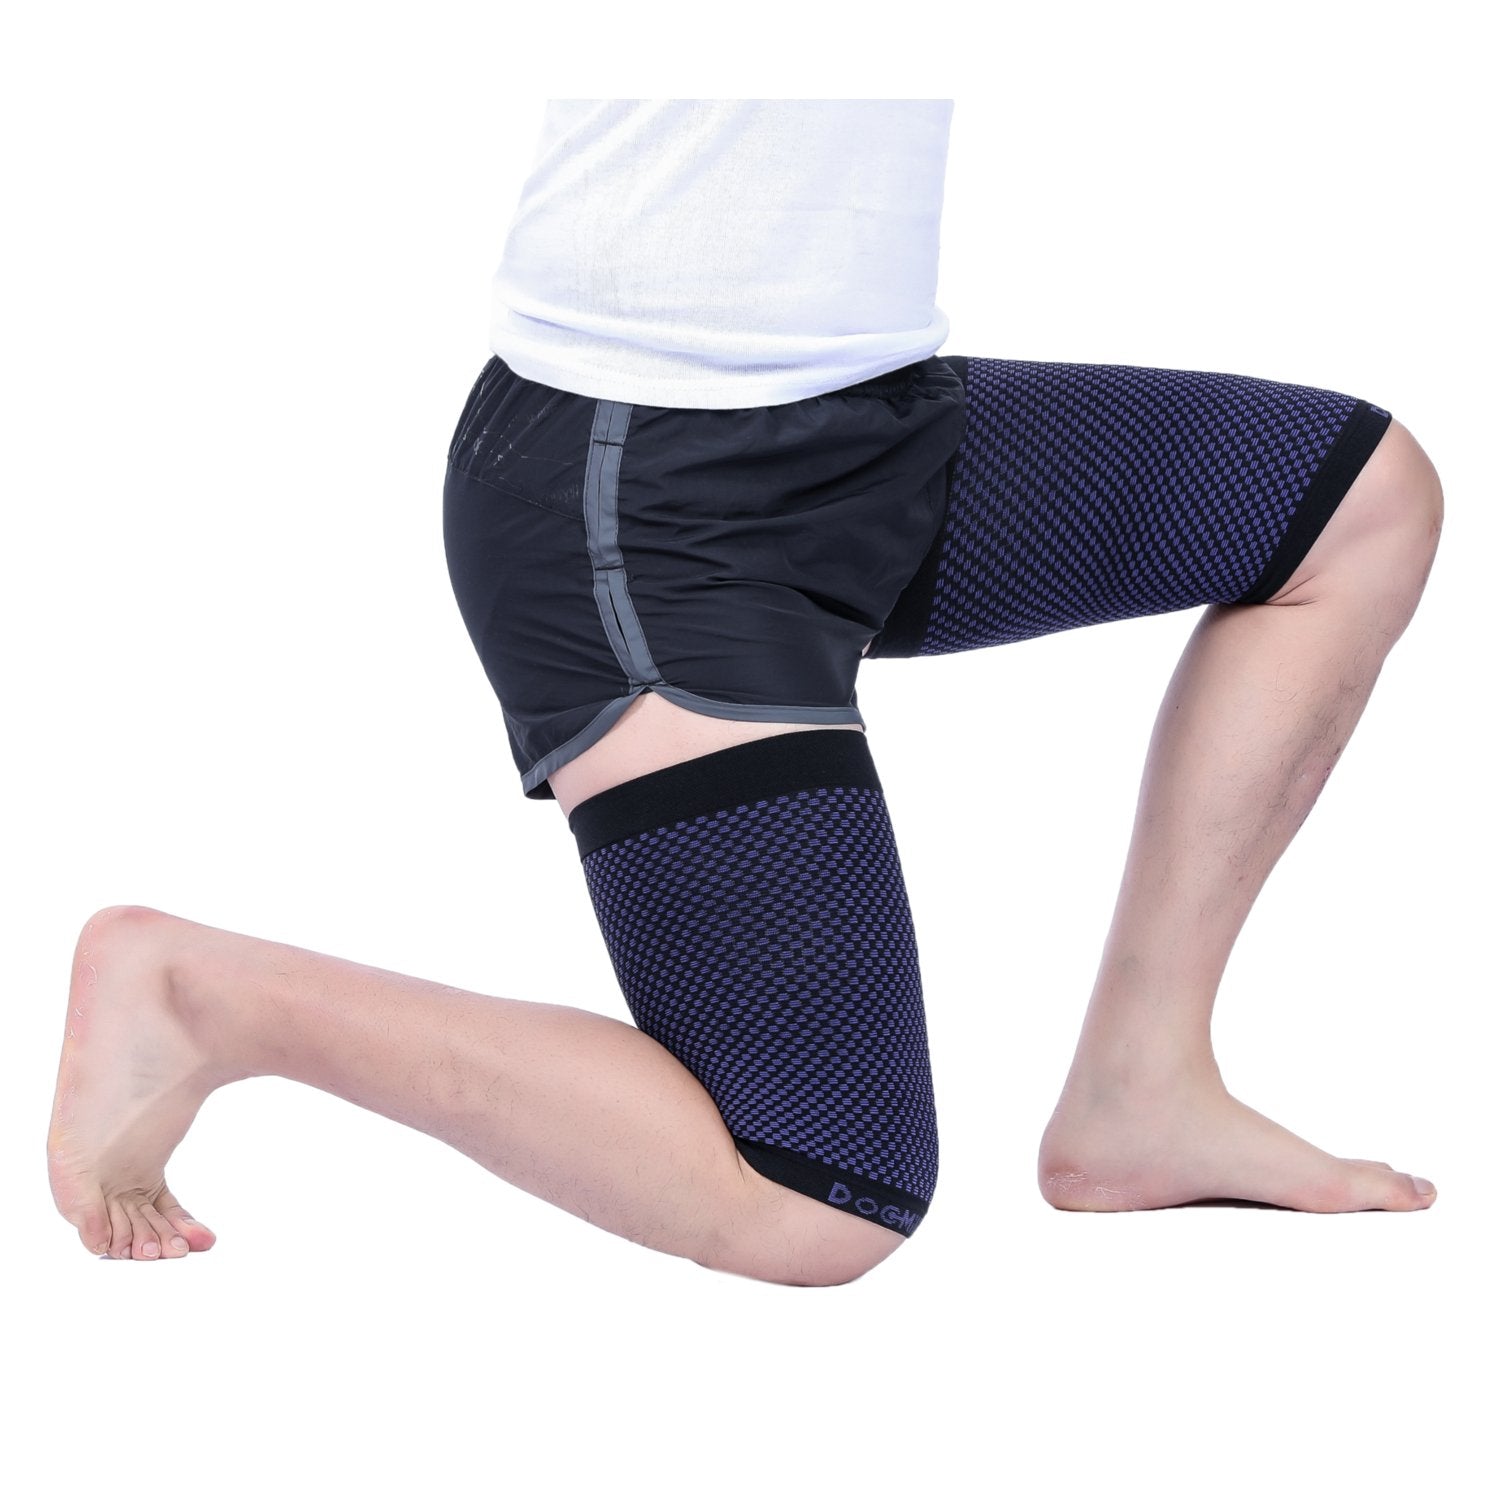 Thigh Compression Sleeves